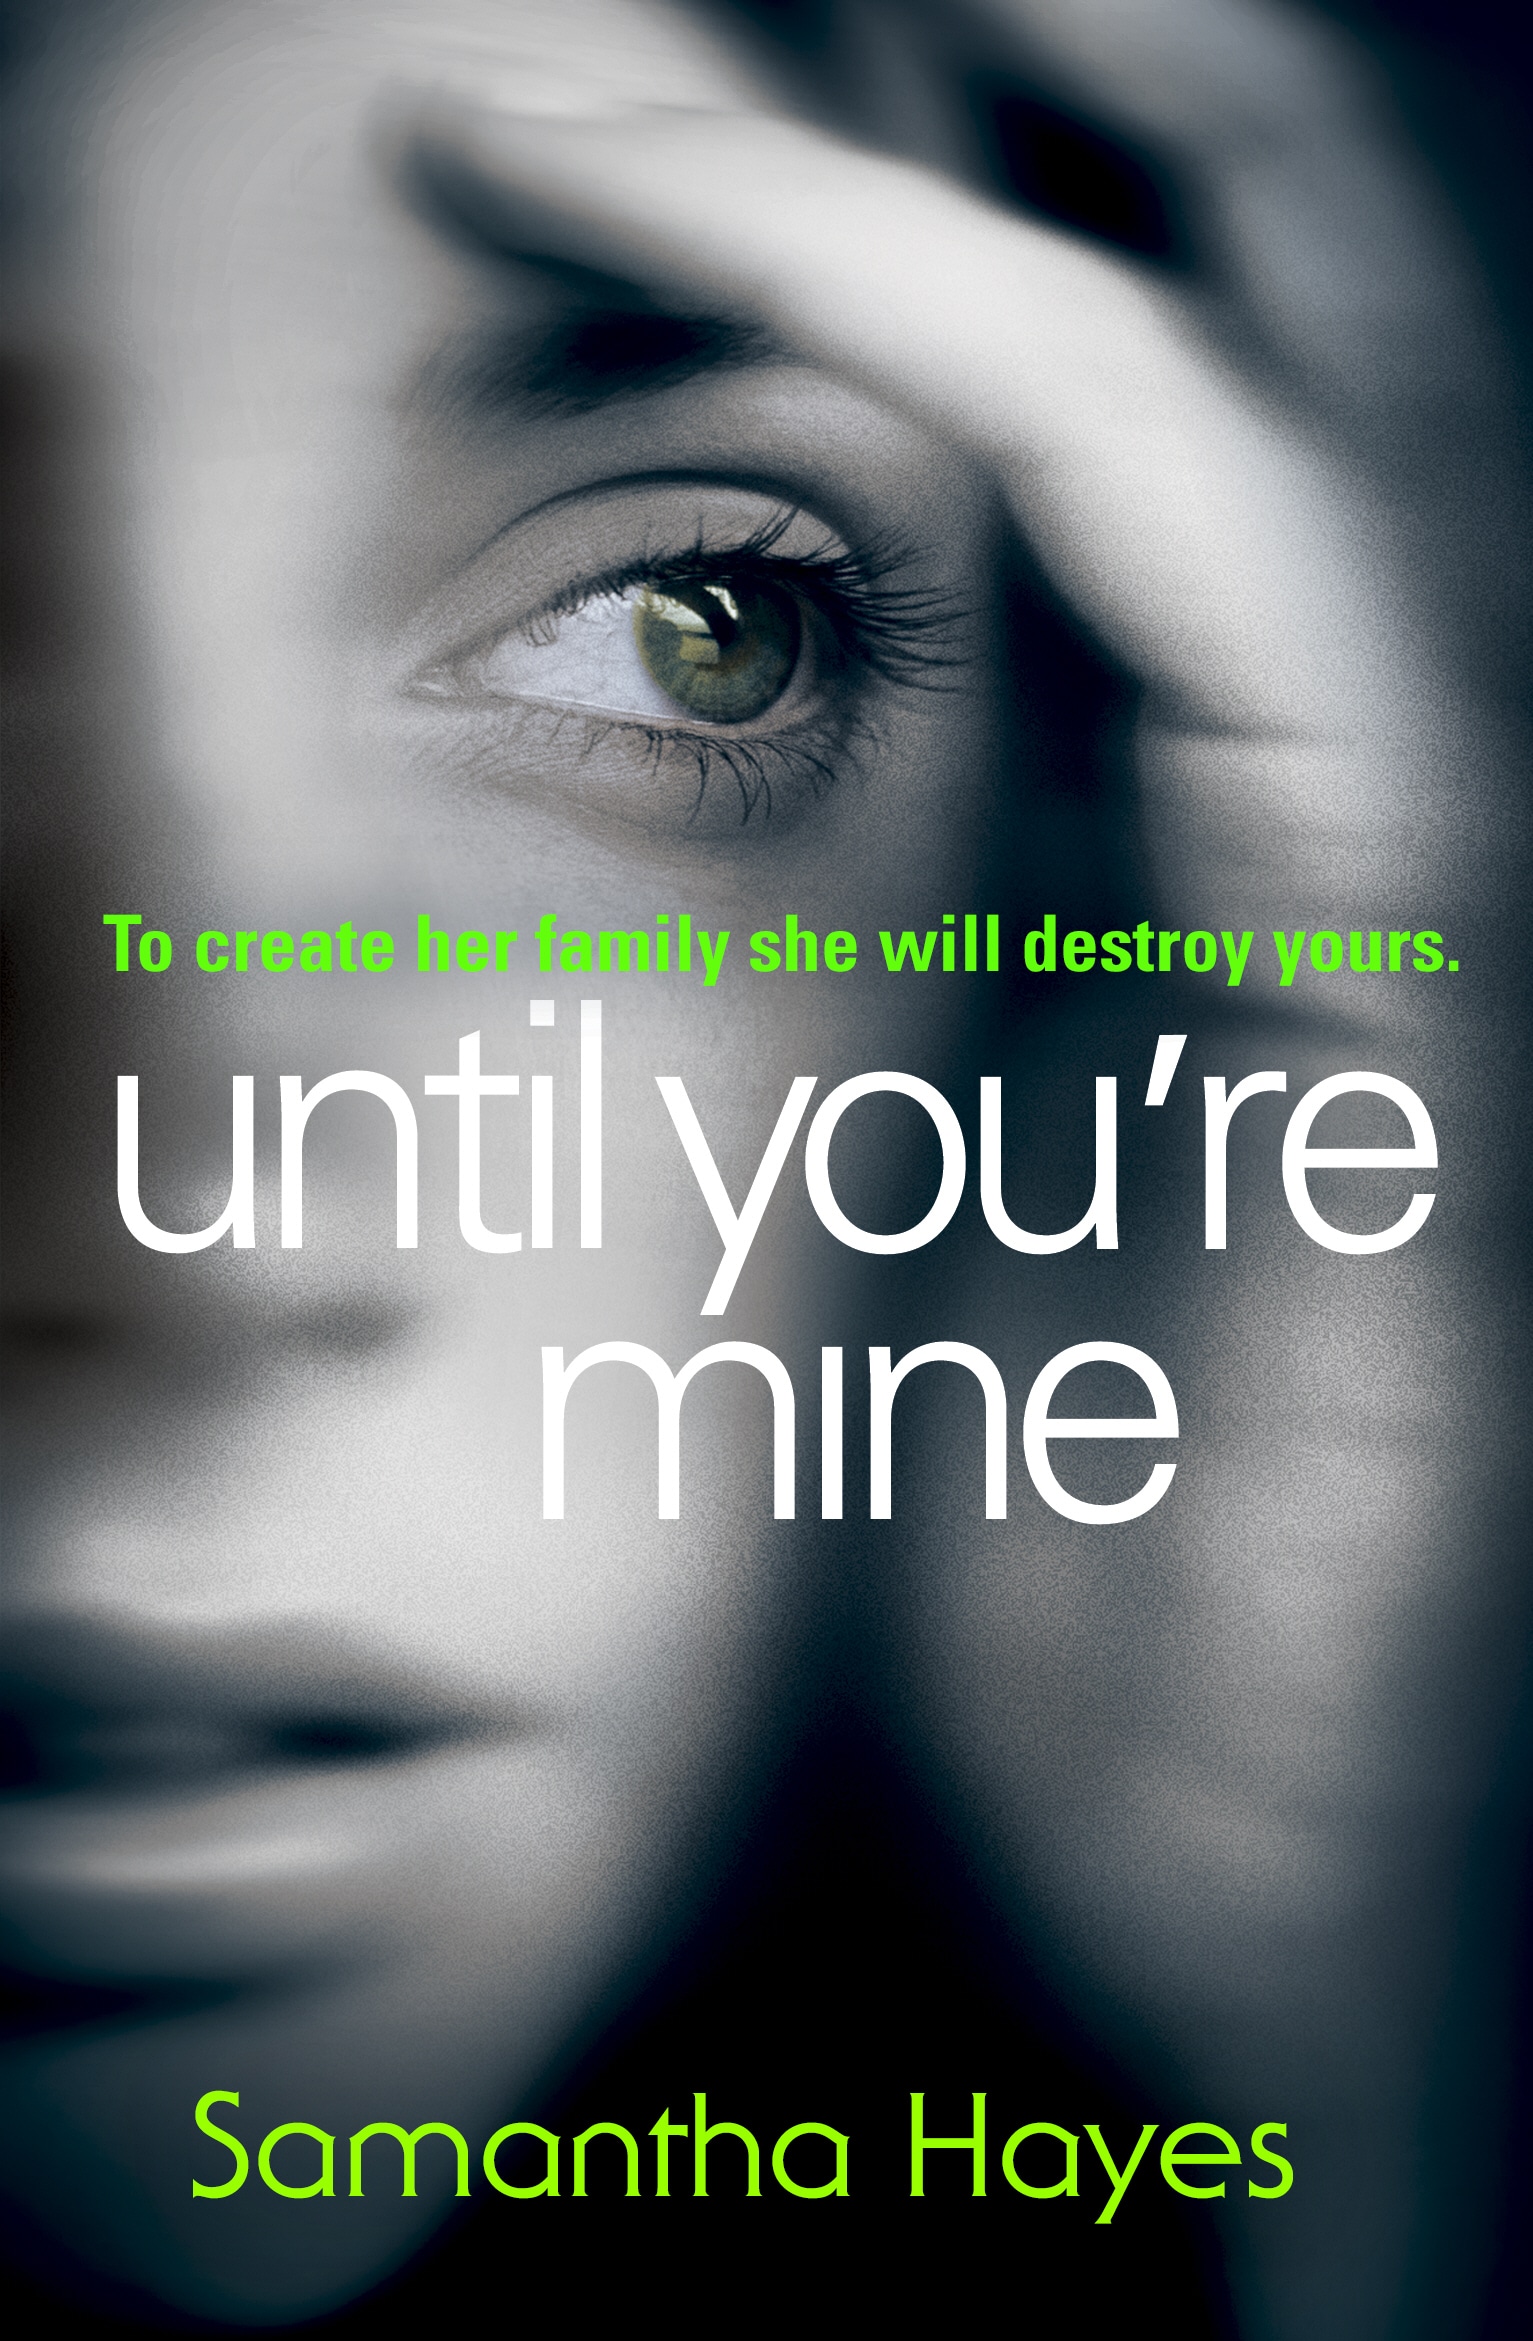 Book “Until You're Mine” by Samantha Hayes — January 2, 2014